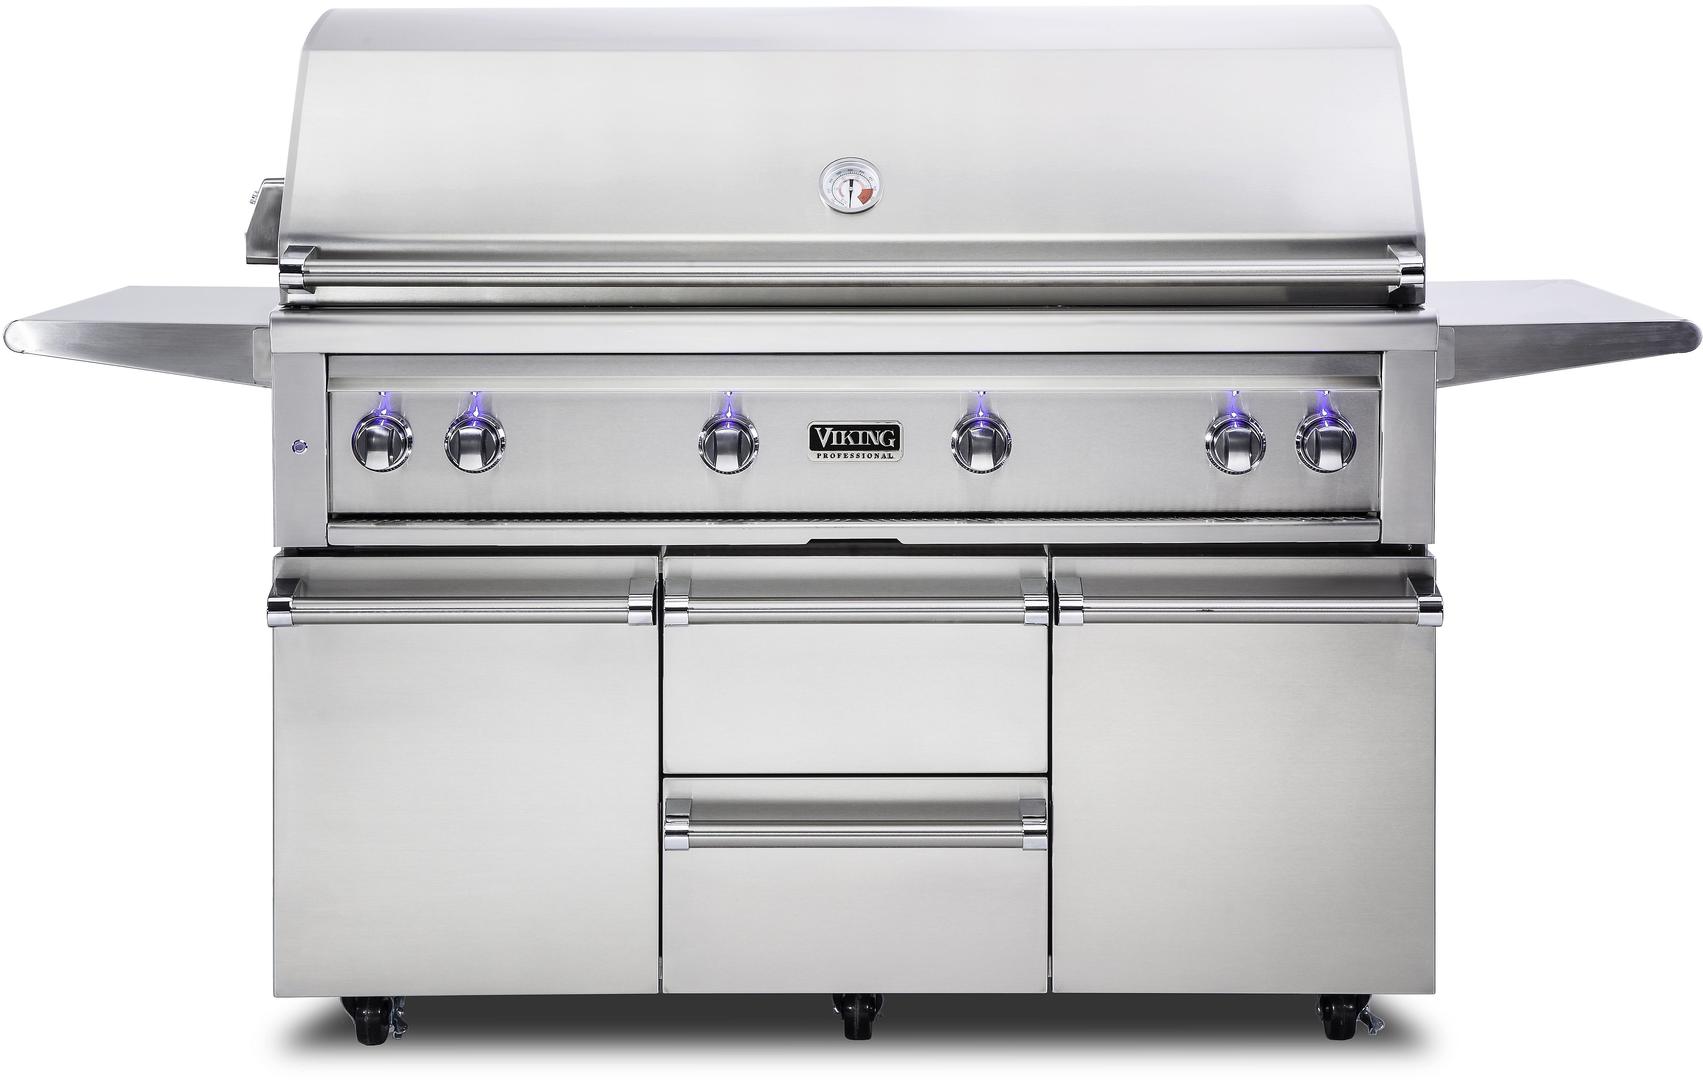 Viking® Professional 5 Series 54" Freestanding Grill-Stainless Steel